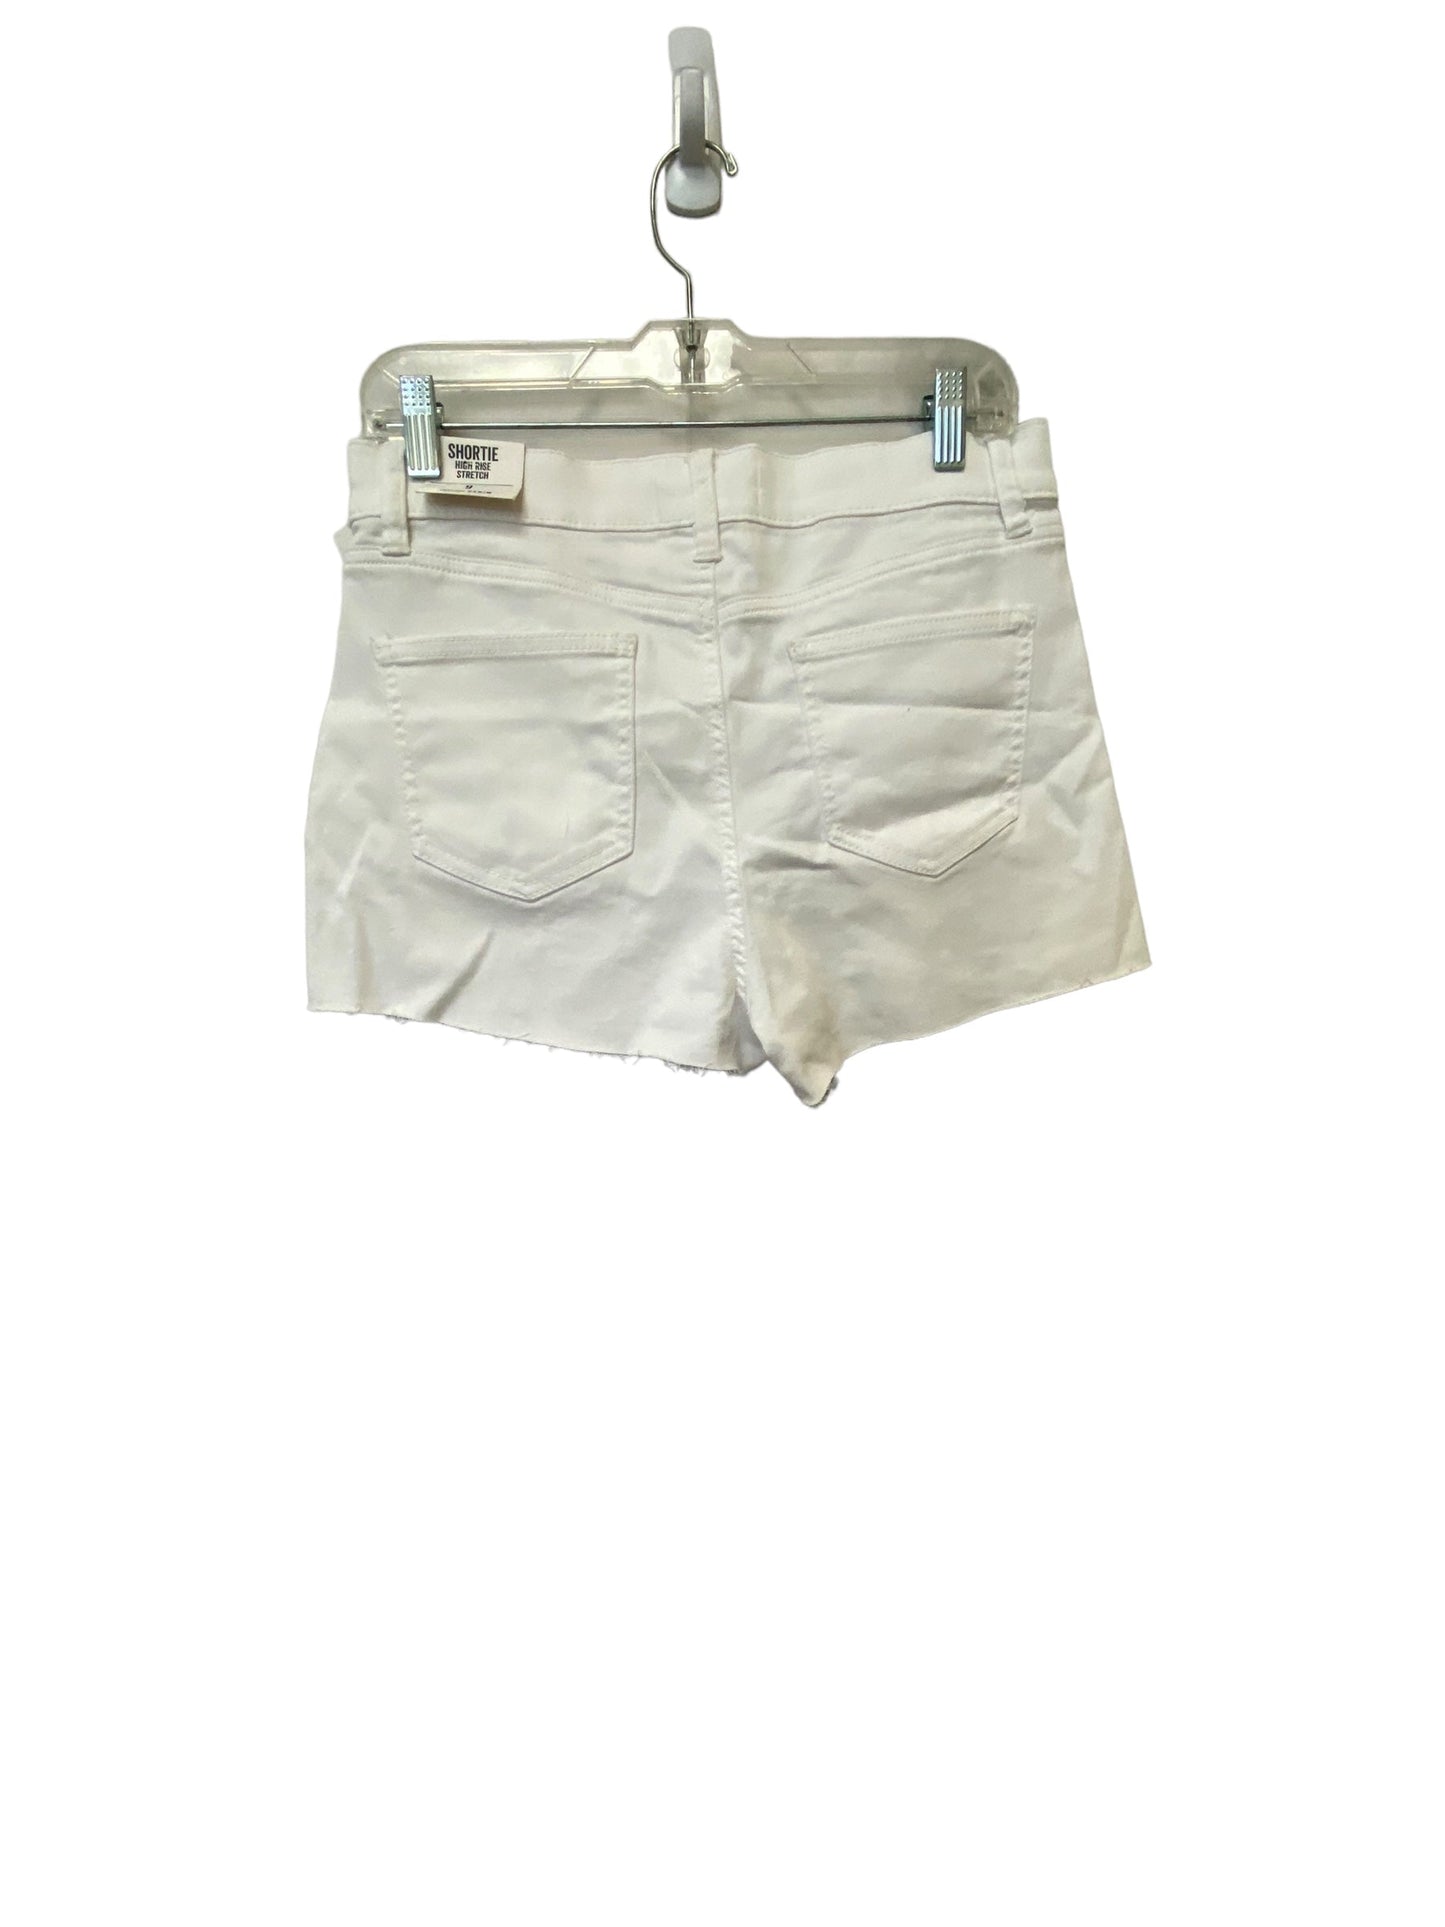 Shorts By Clothes Mentor  Size: 9